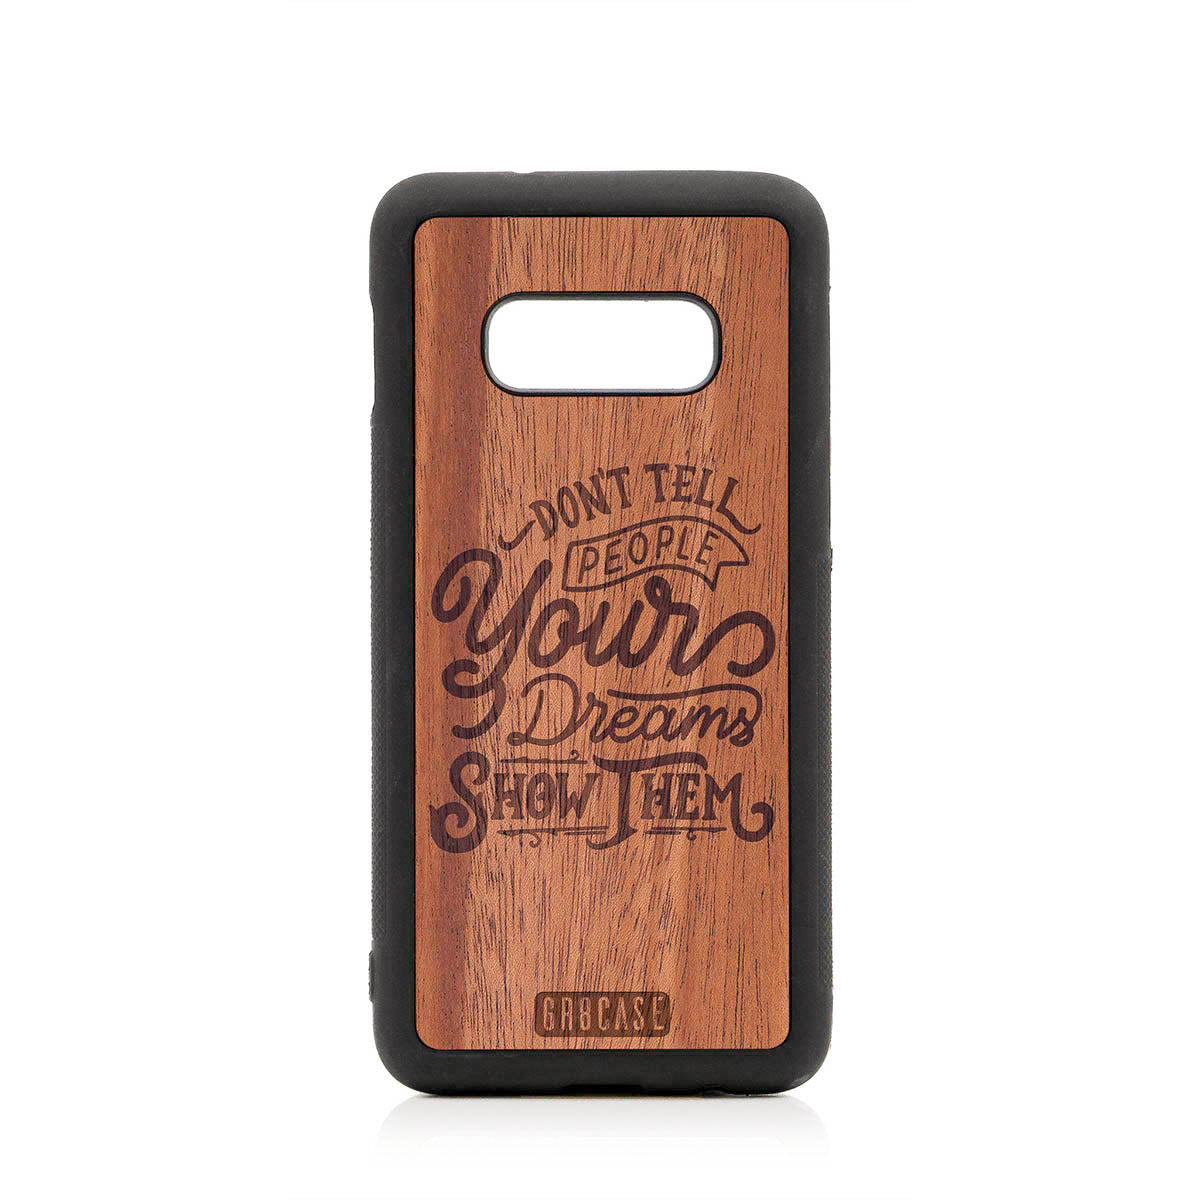 Don't Tell People Your Dreams Show Them Design Wood Case For Samsung Galaxy S10E by GR8CASE